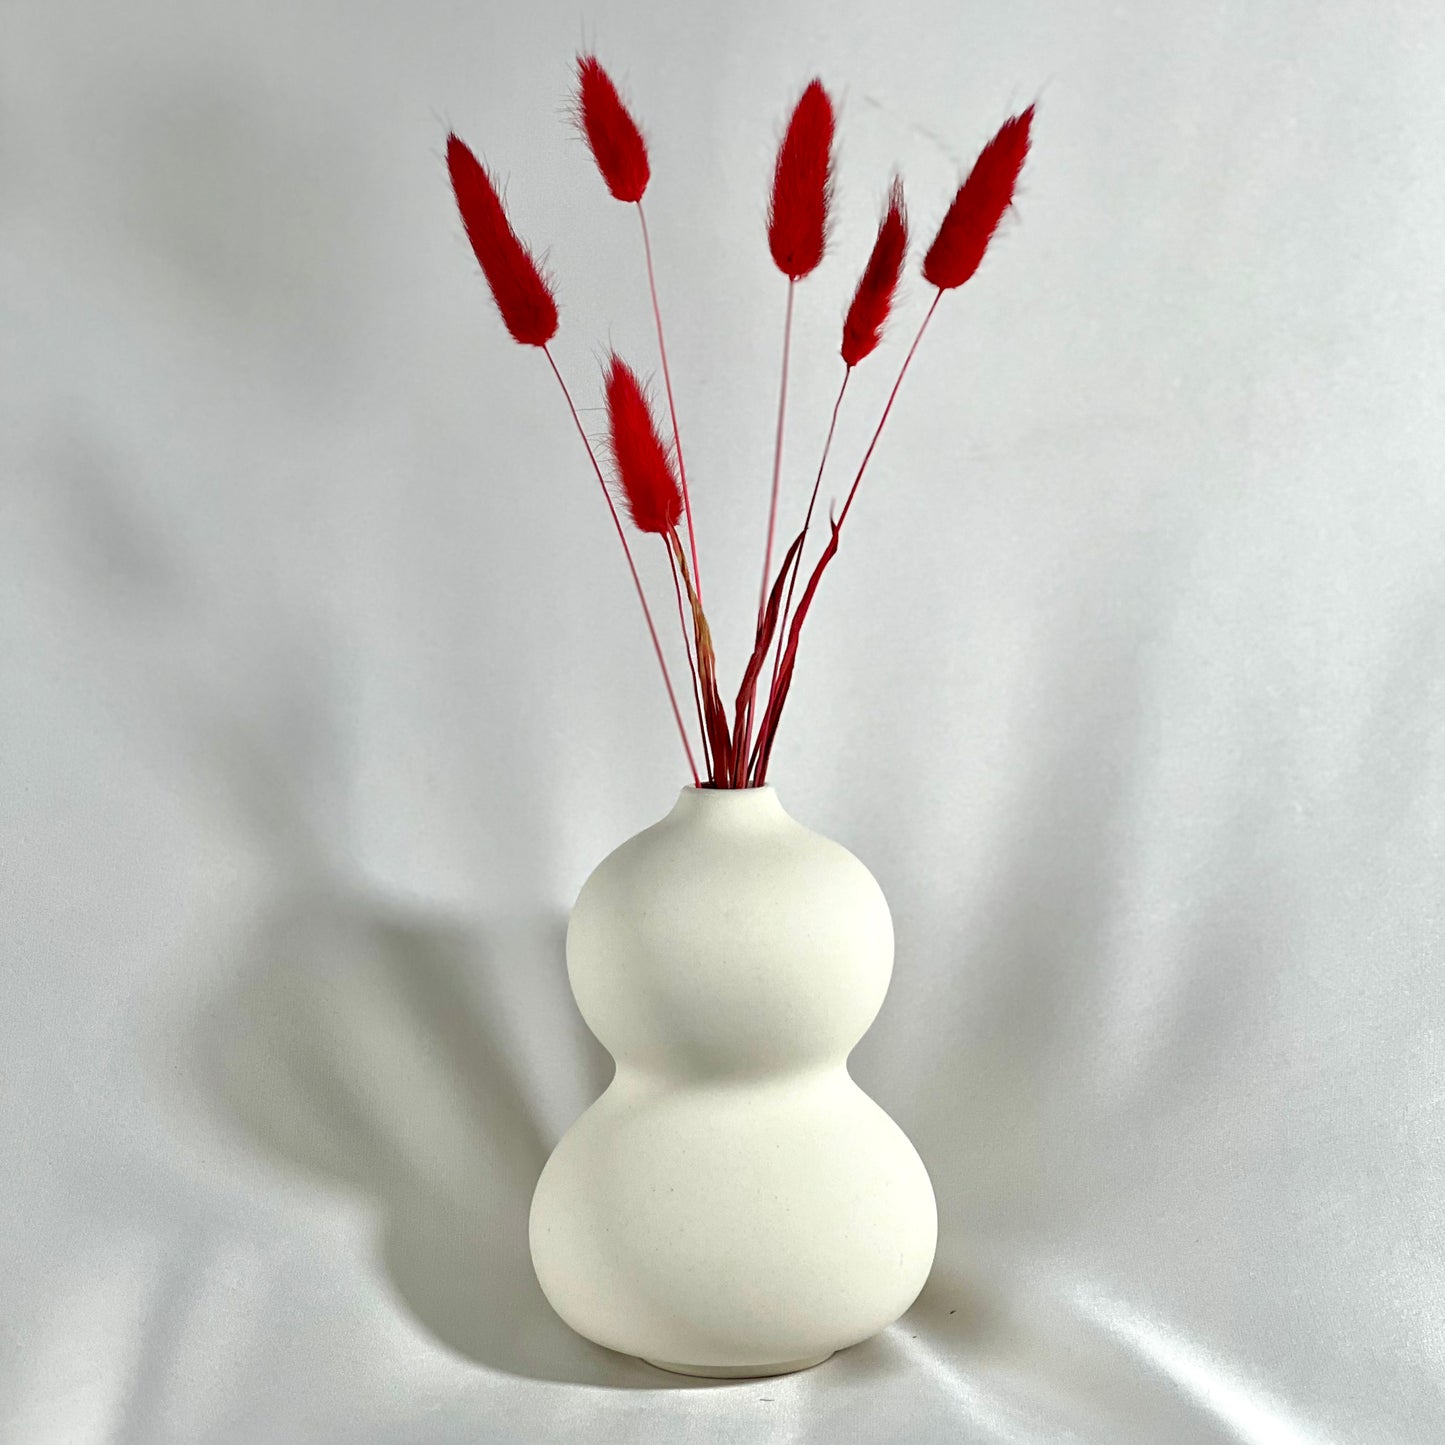 Gourd Harmony vase with Bunny Tails